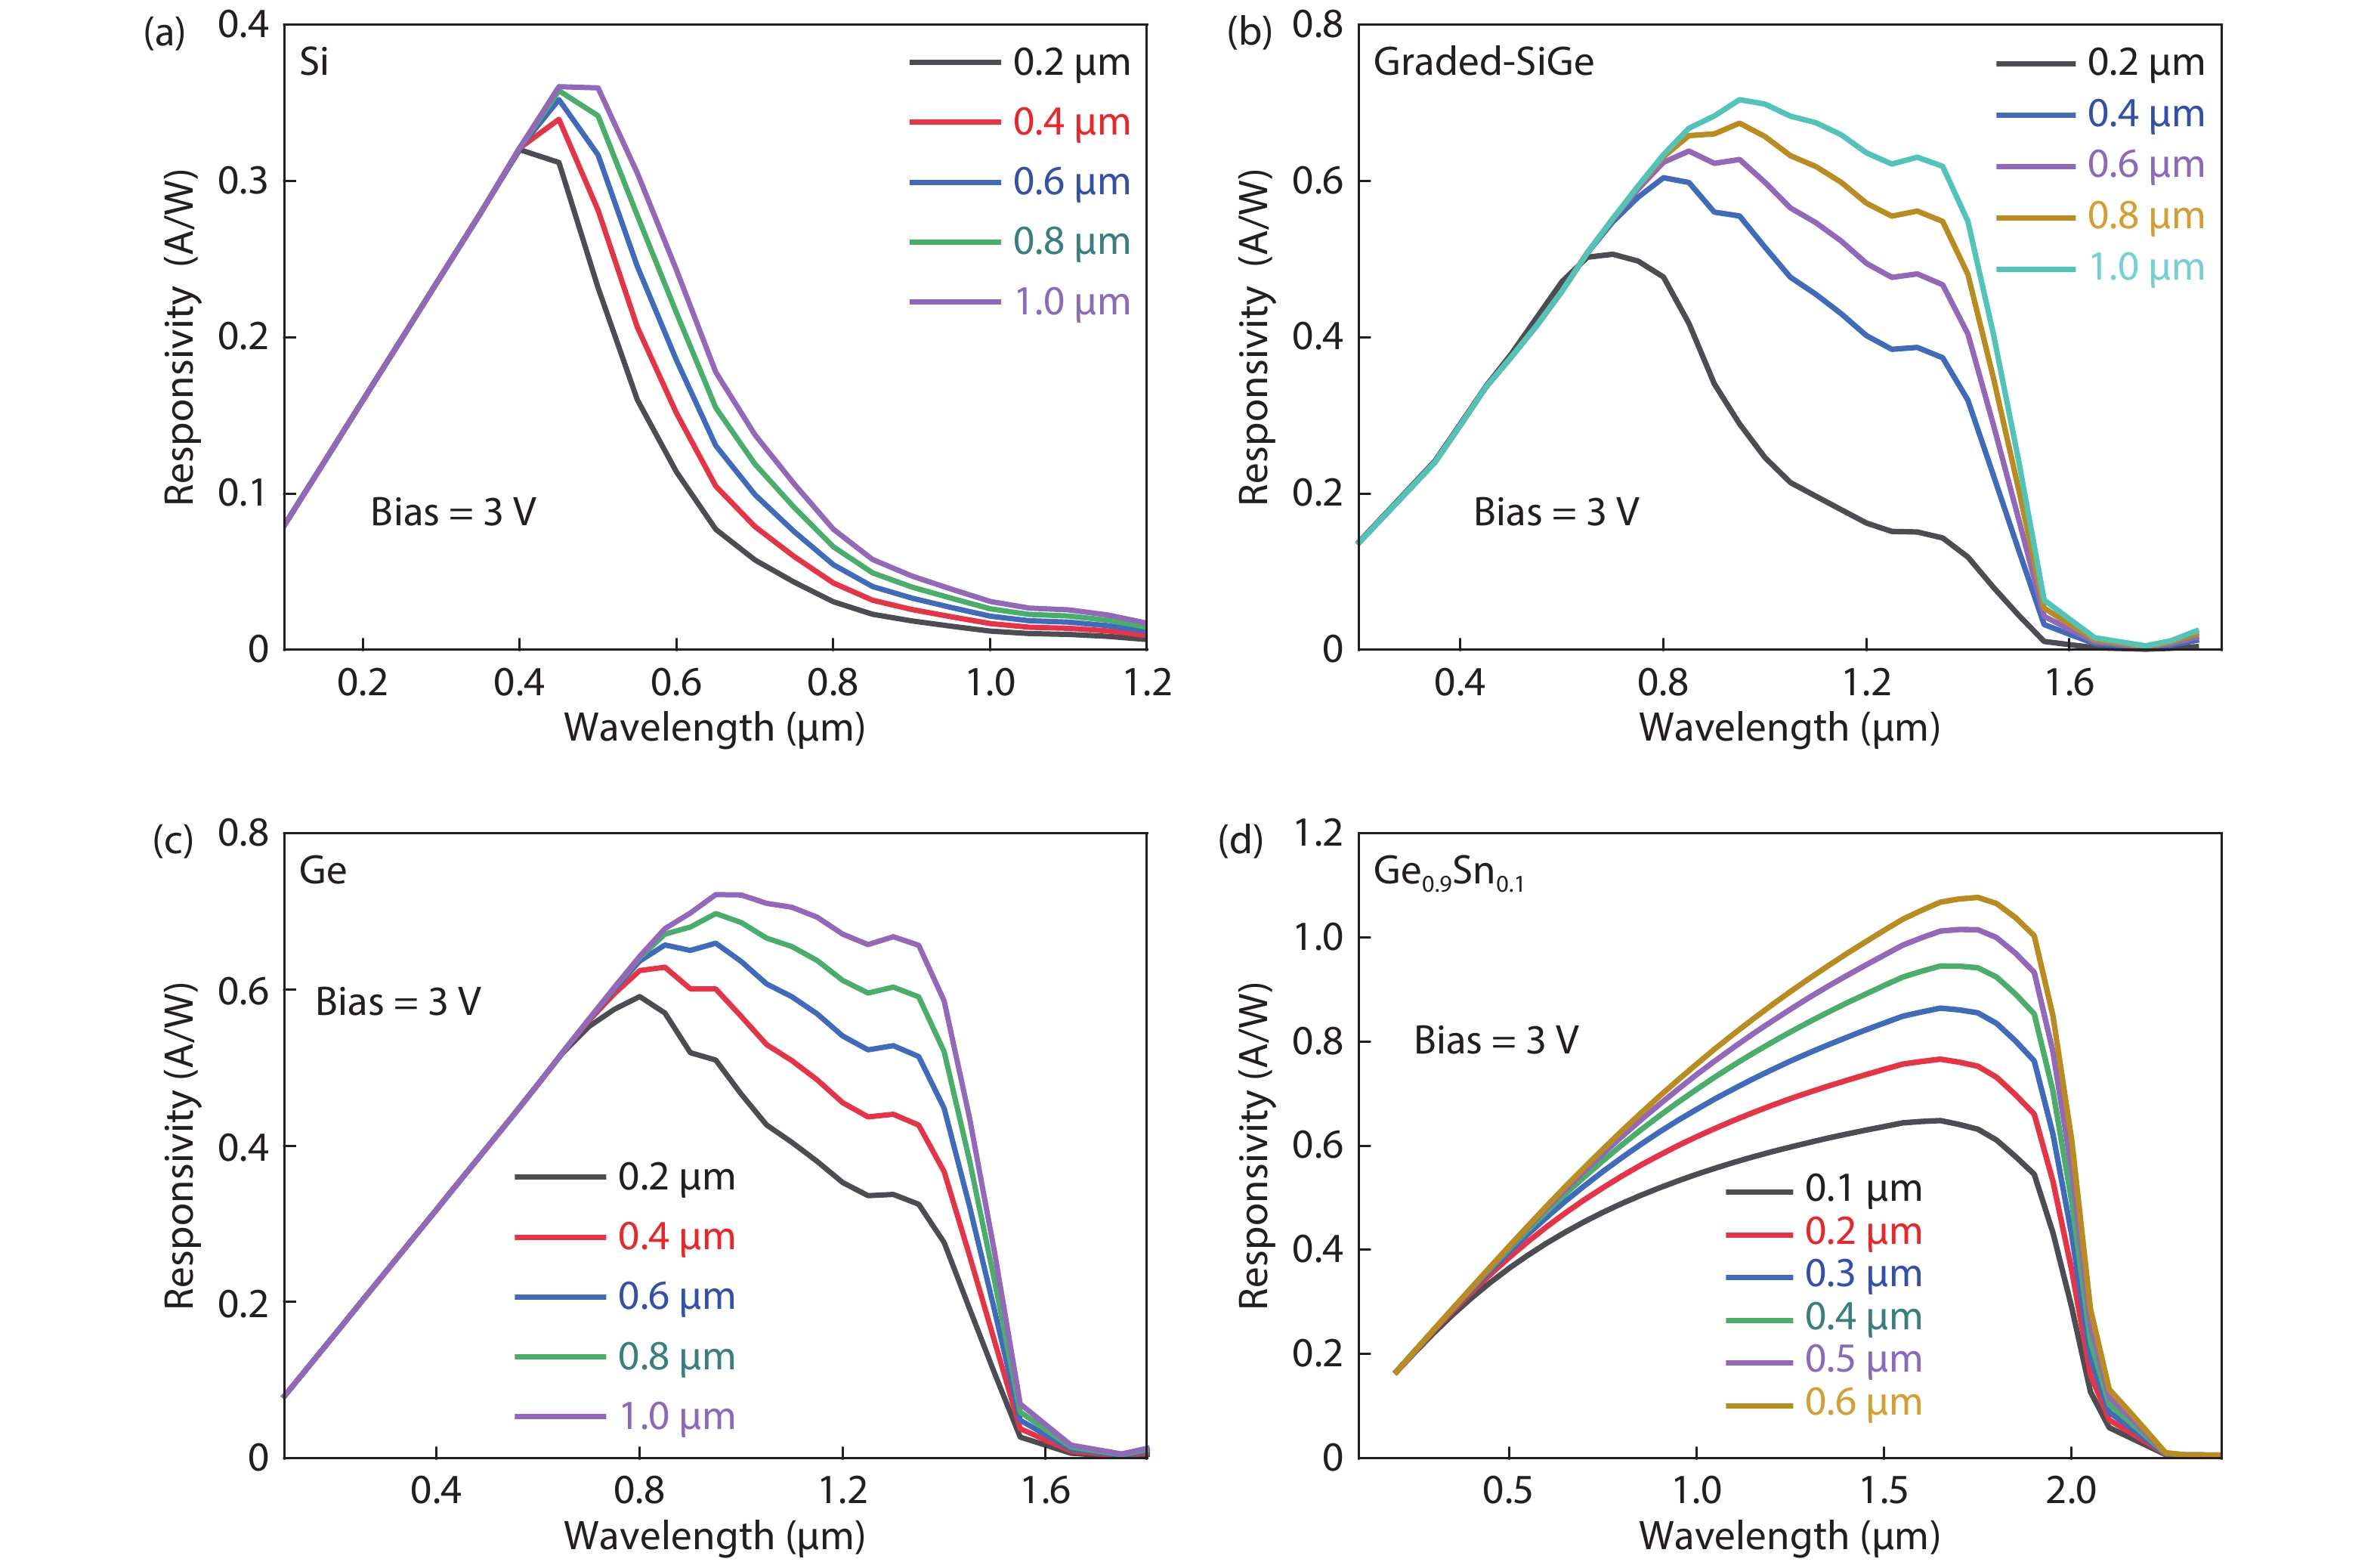 (Color online) Simulation of spectral responsivity of the p–i–n photodetector with single material as active region for (a) Si, (b) graded-SiGe, (c) Ge, and (d) Ge0.9Sn0.1.